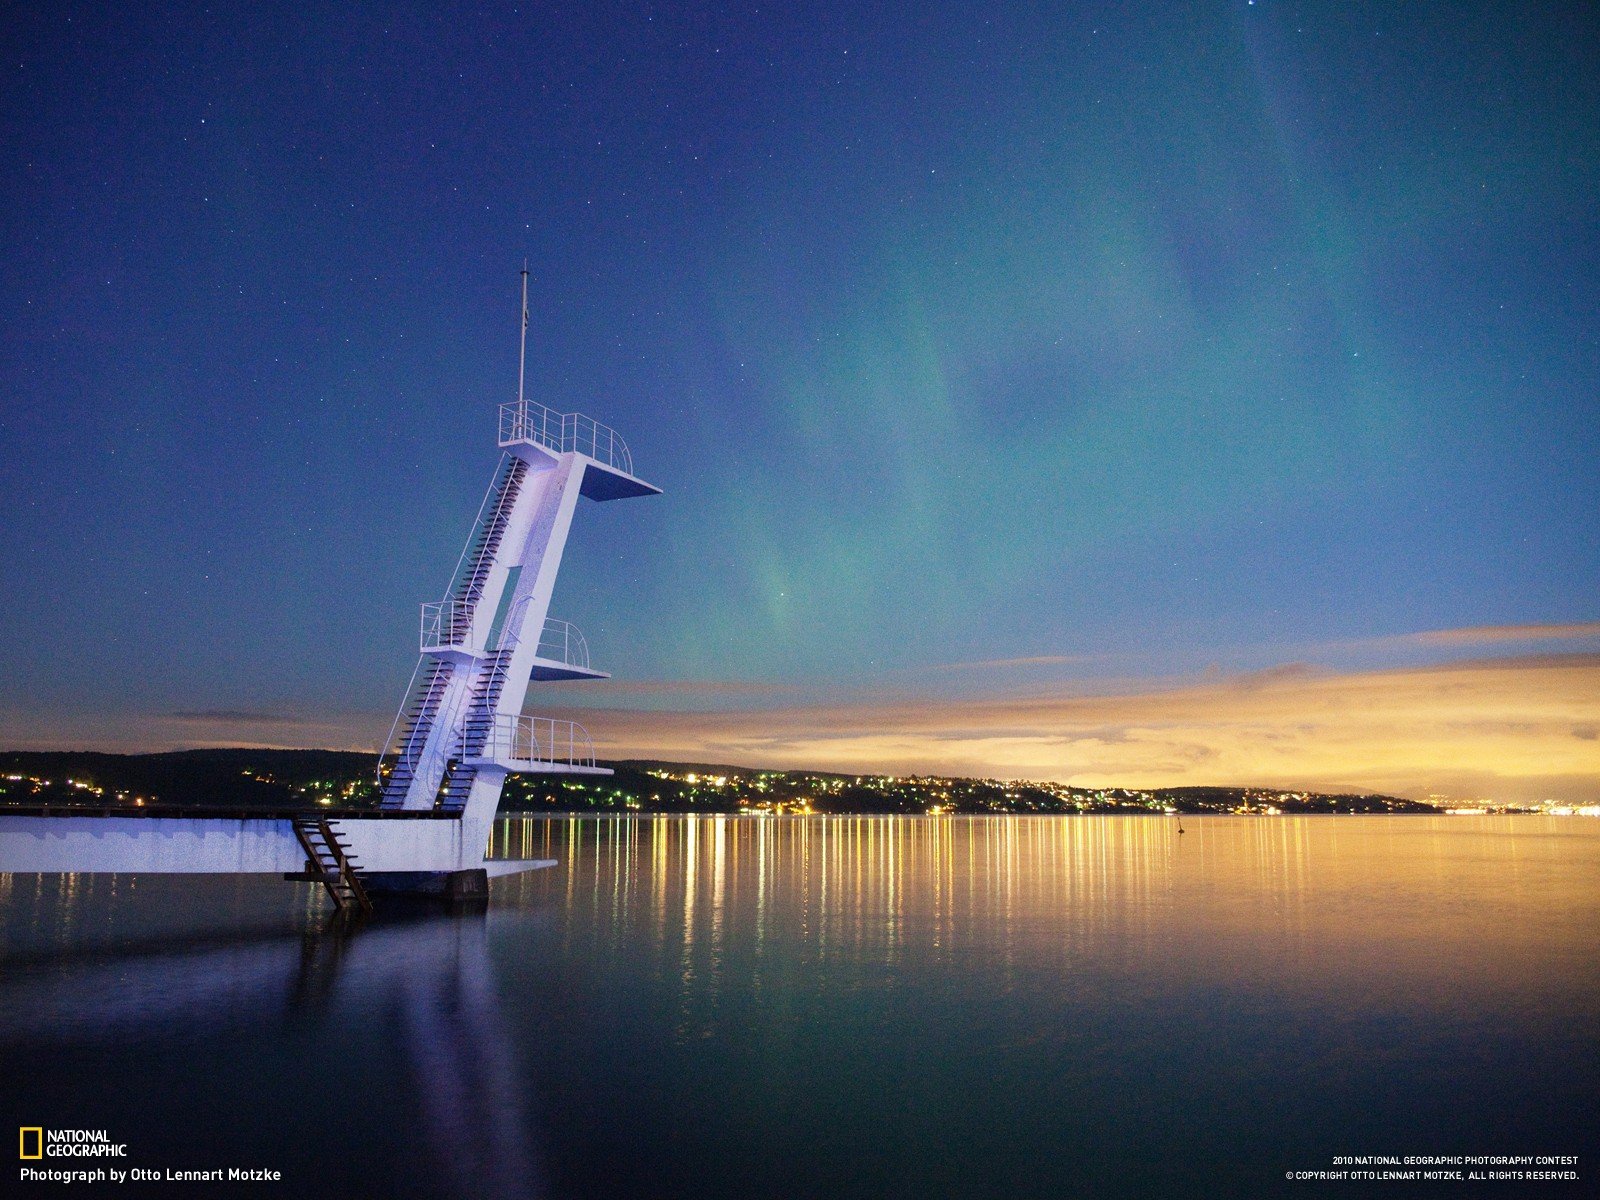 Oslo, National Geographic Wallpaper